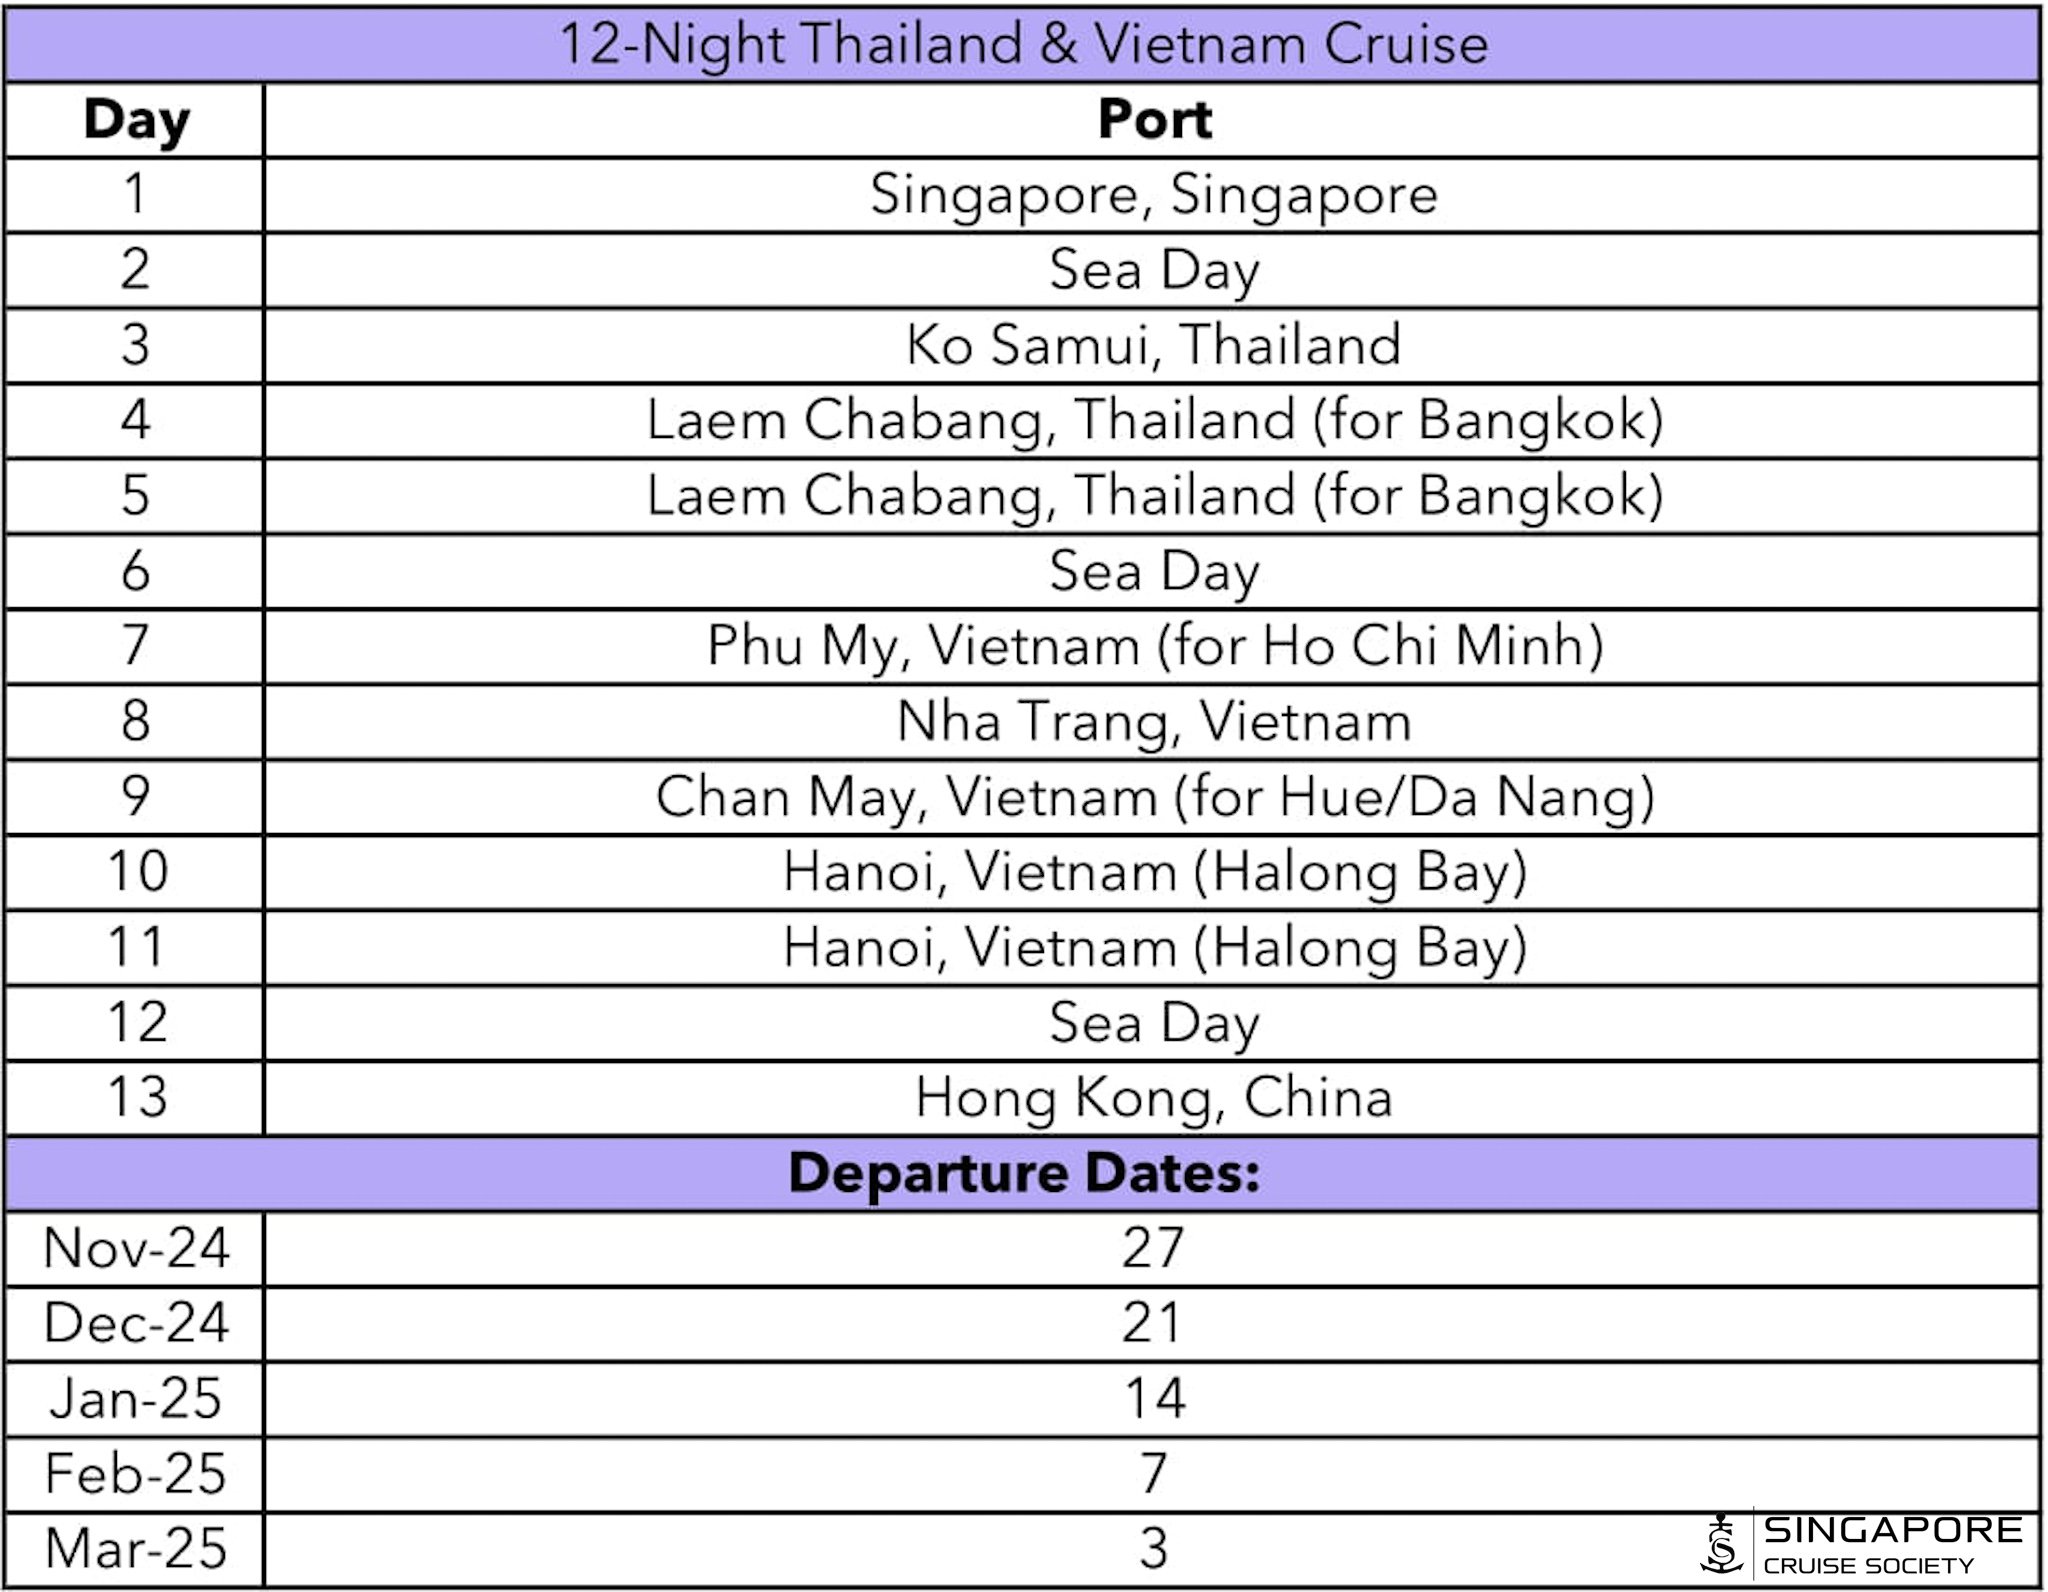   The 21 December 2024 Departure is a Christmas and New Year’s cruise.   PHOTO: SINGAPORE CRUISE SOCIETY  